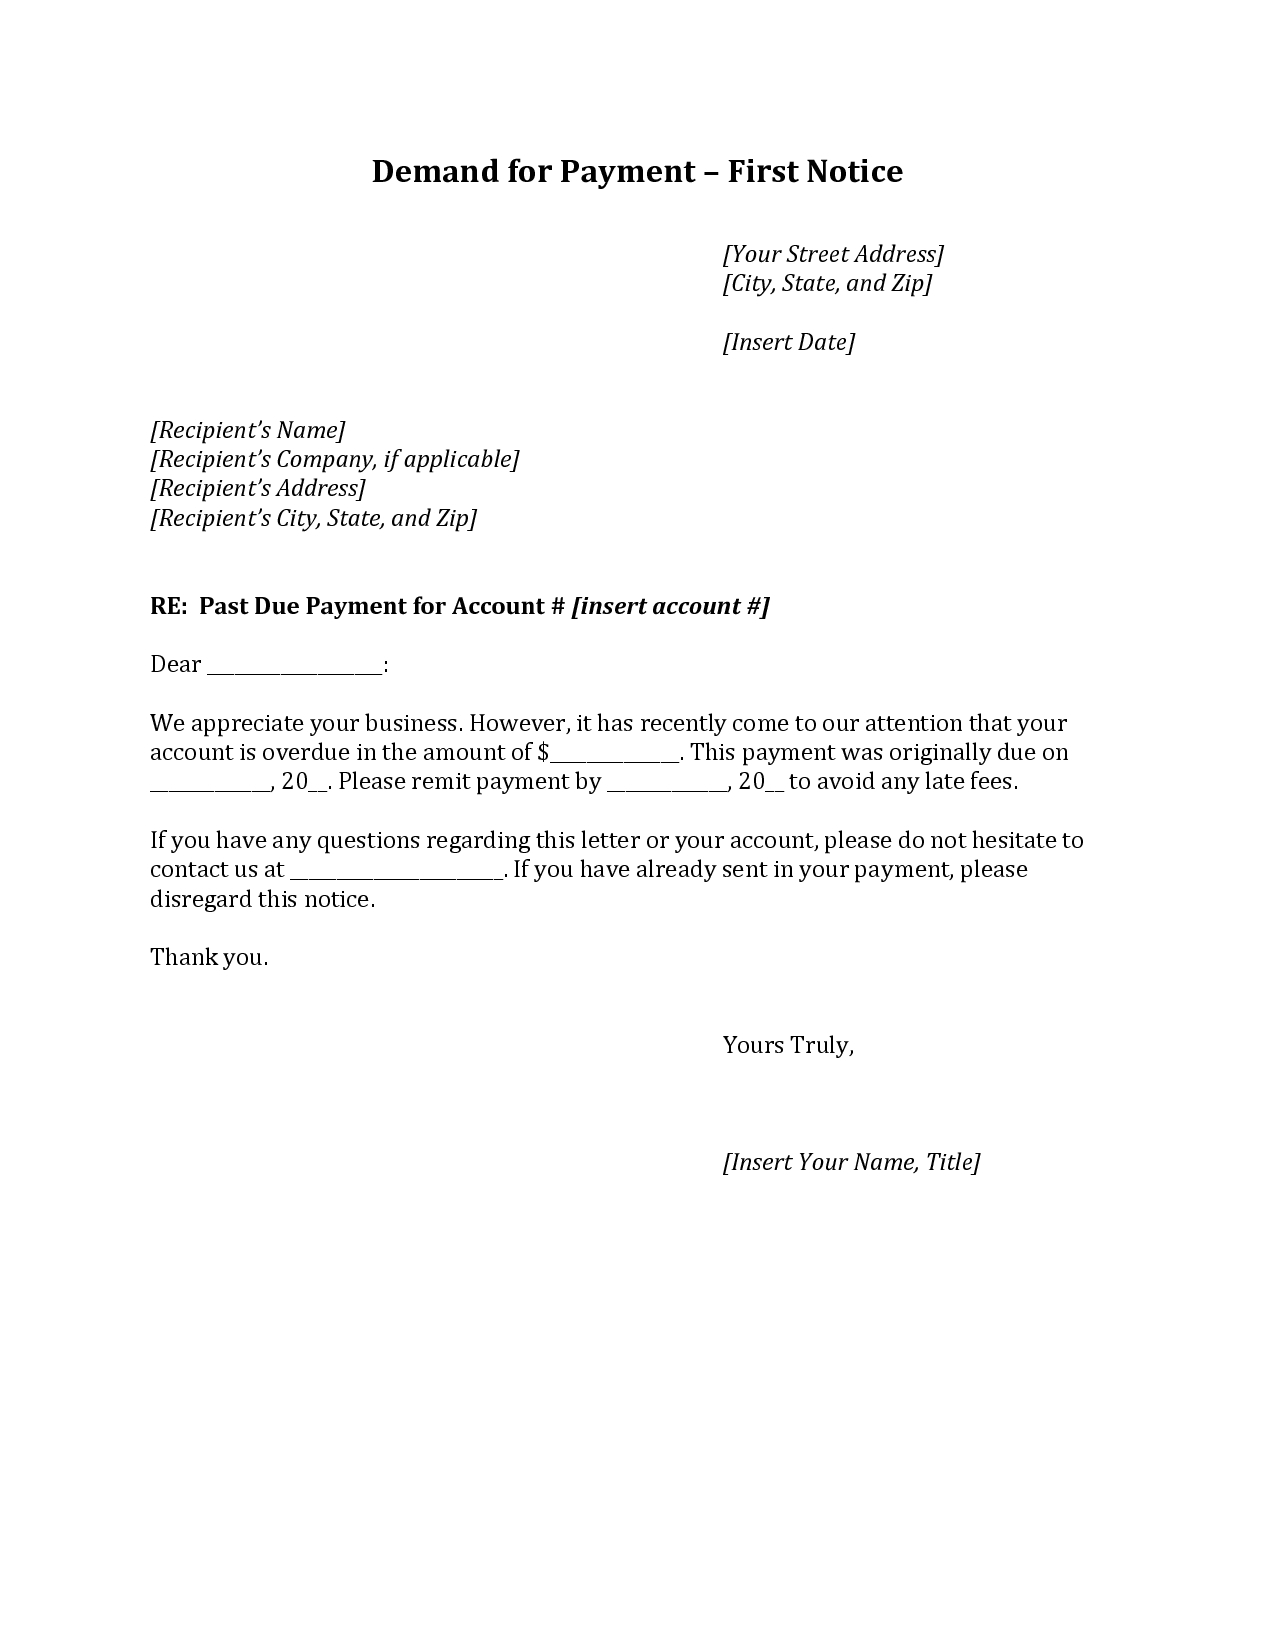 Outstanding Payment Letter Template - Letter Writing format for Outstanding Payment Inspiration Demand for